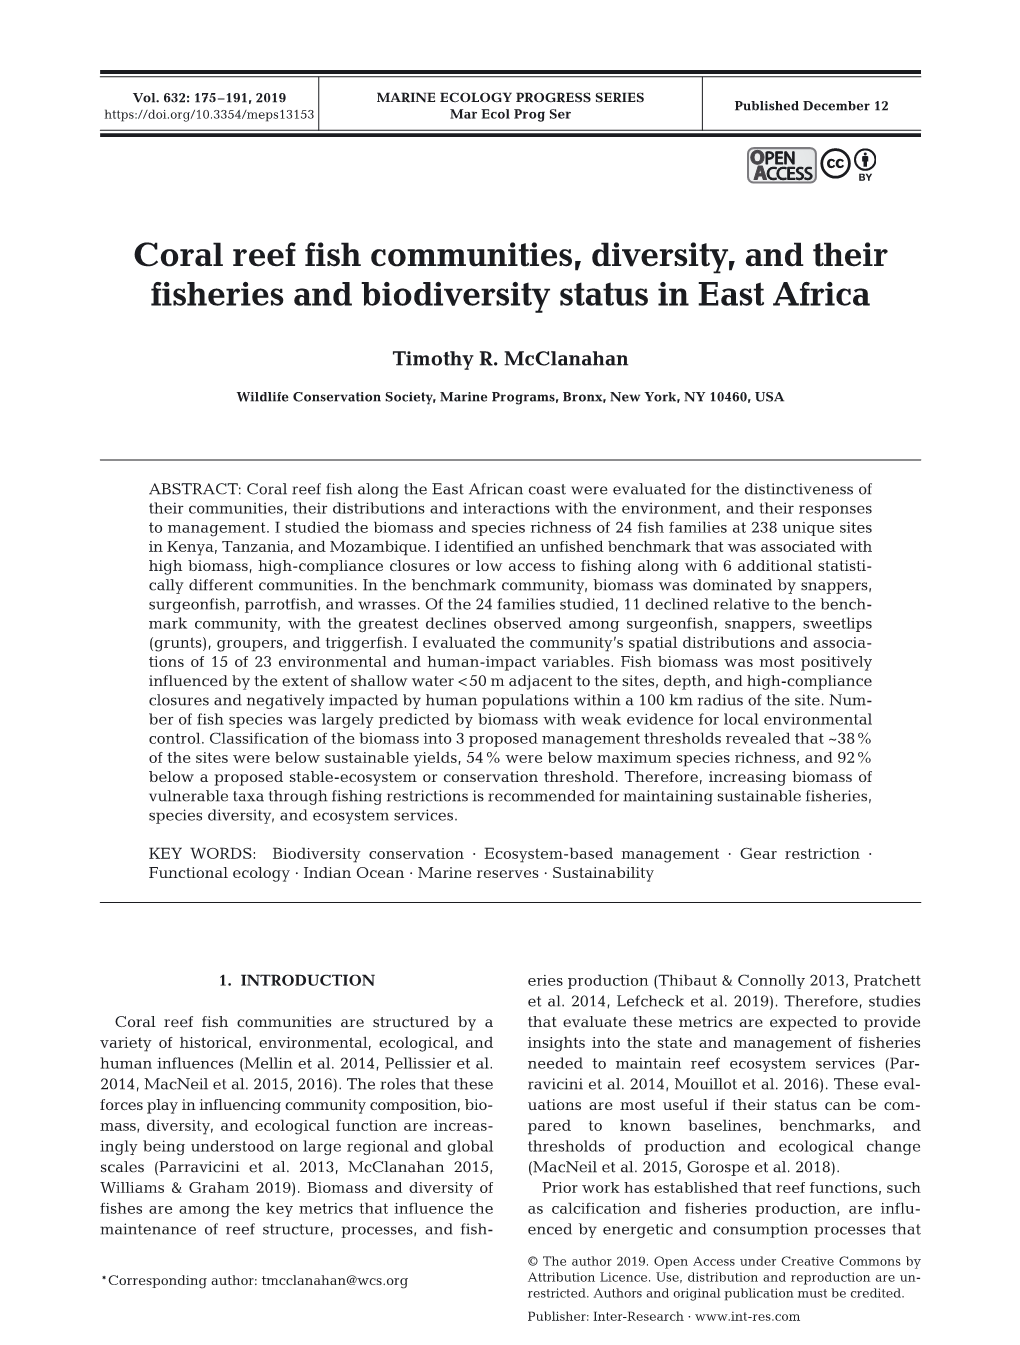 Coral Reef Fish Communities, Diversity, and Their Fisheries and Biodiversity Status in East Africa